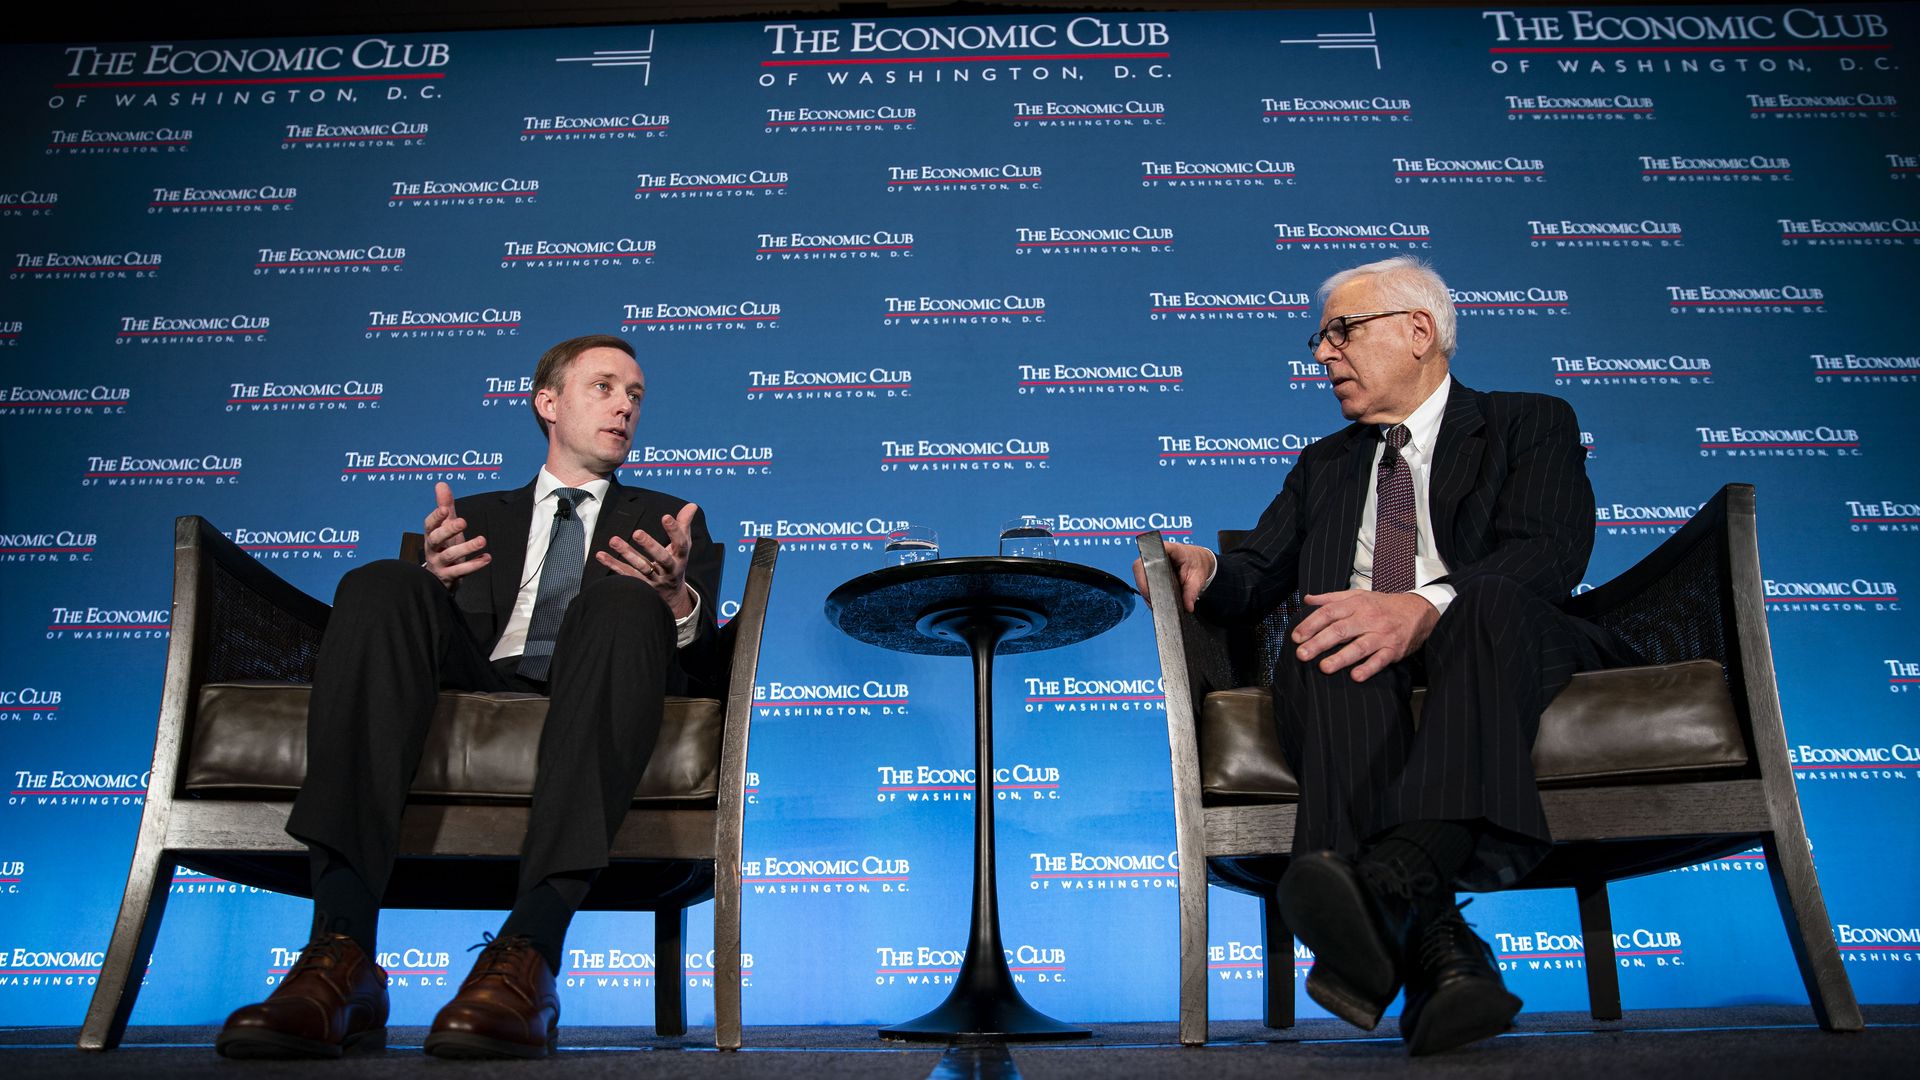 National Security Adviser Jake Sullivan is seen being interviewed at the Economic Club.